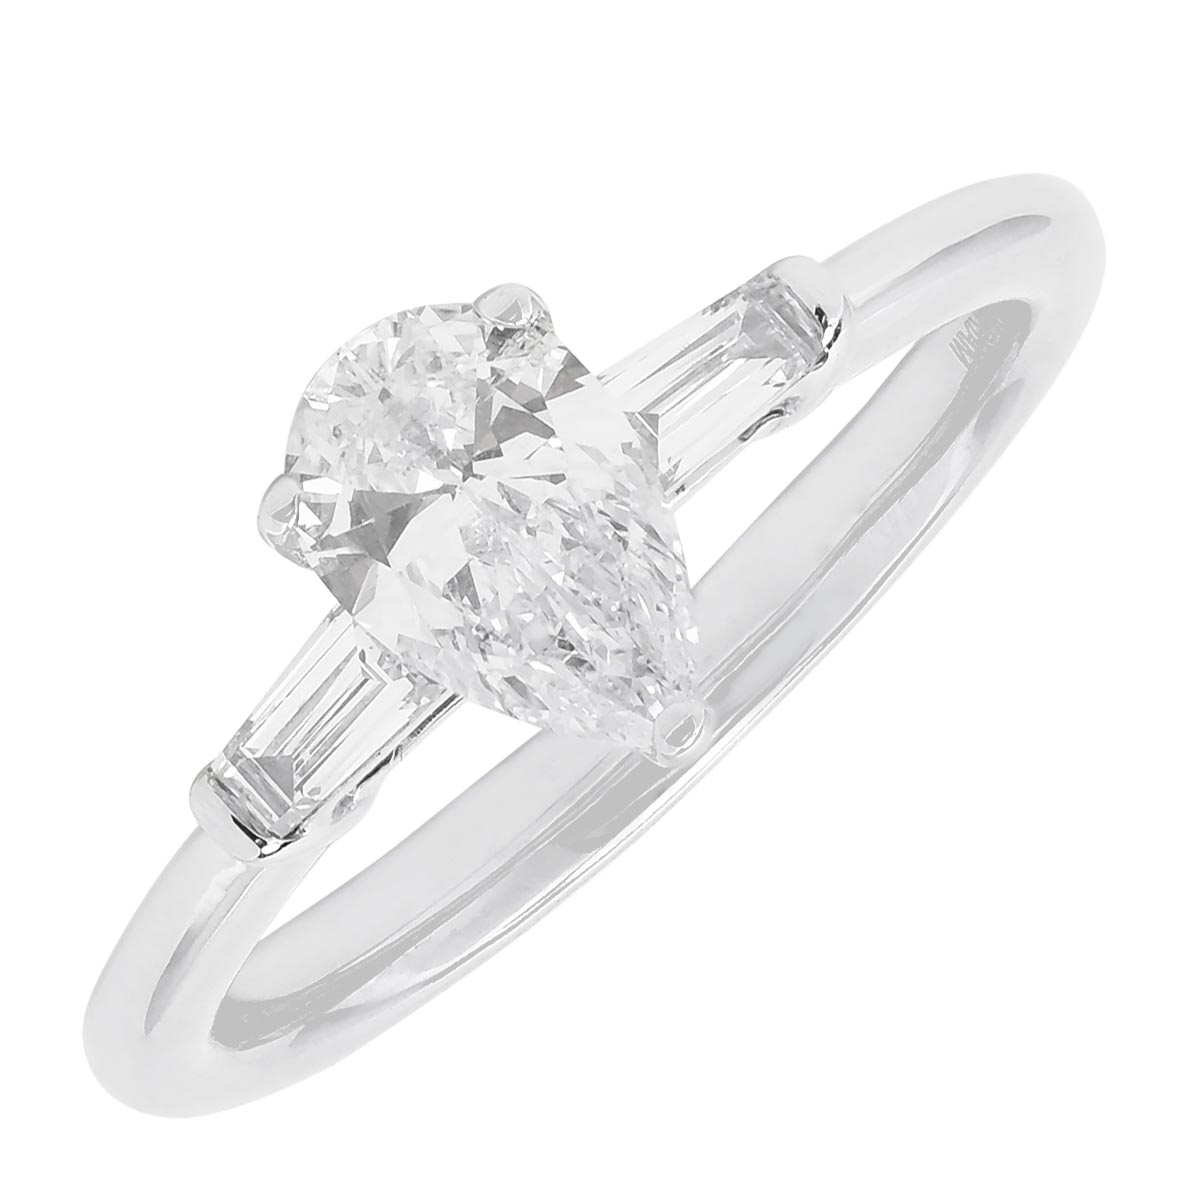 Northern Star Pear Diamond and Baguette Engagement Ring in 14kt White Gold (7/8ct tw)